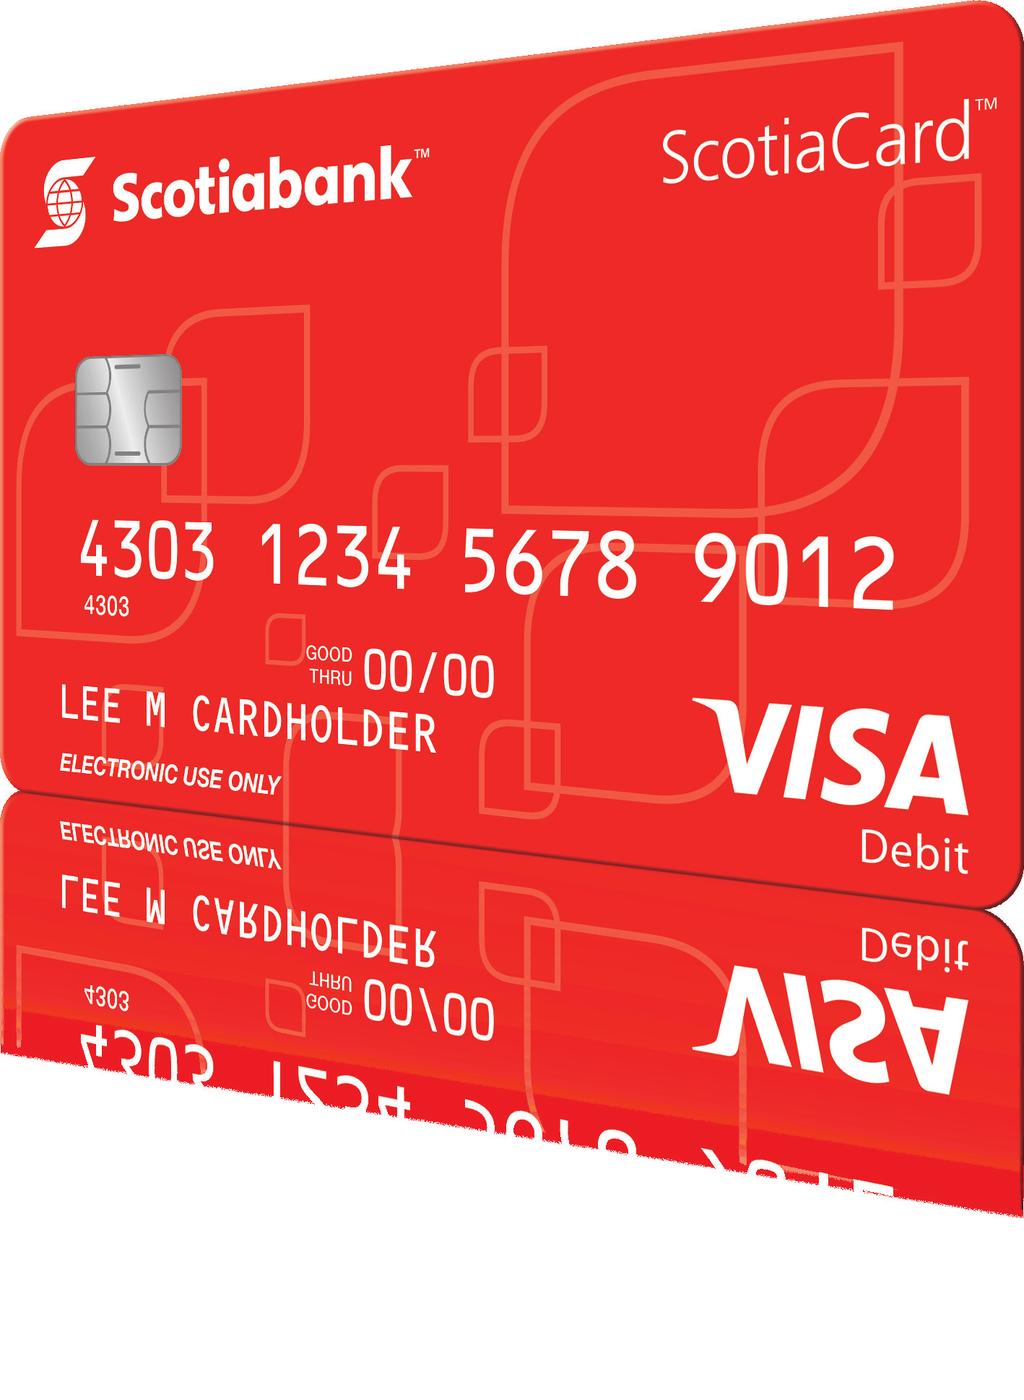 Greater access The ScotiaCard with Visa Debit is an enhanced version of the existing ScotiaCard that allows you to access the funds in your